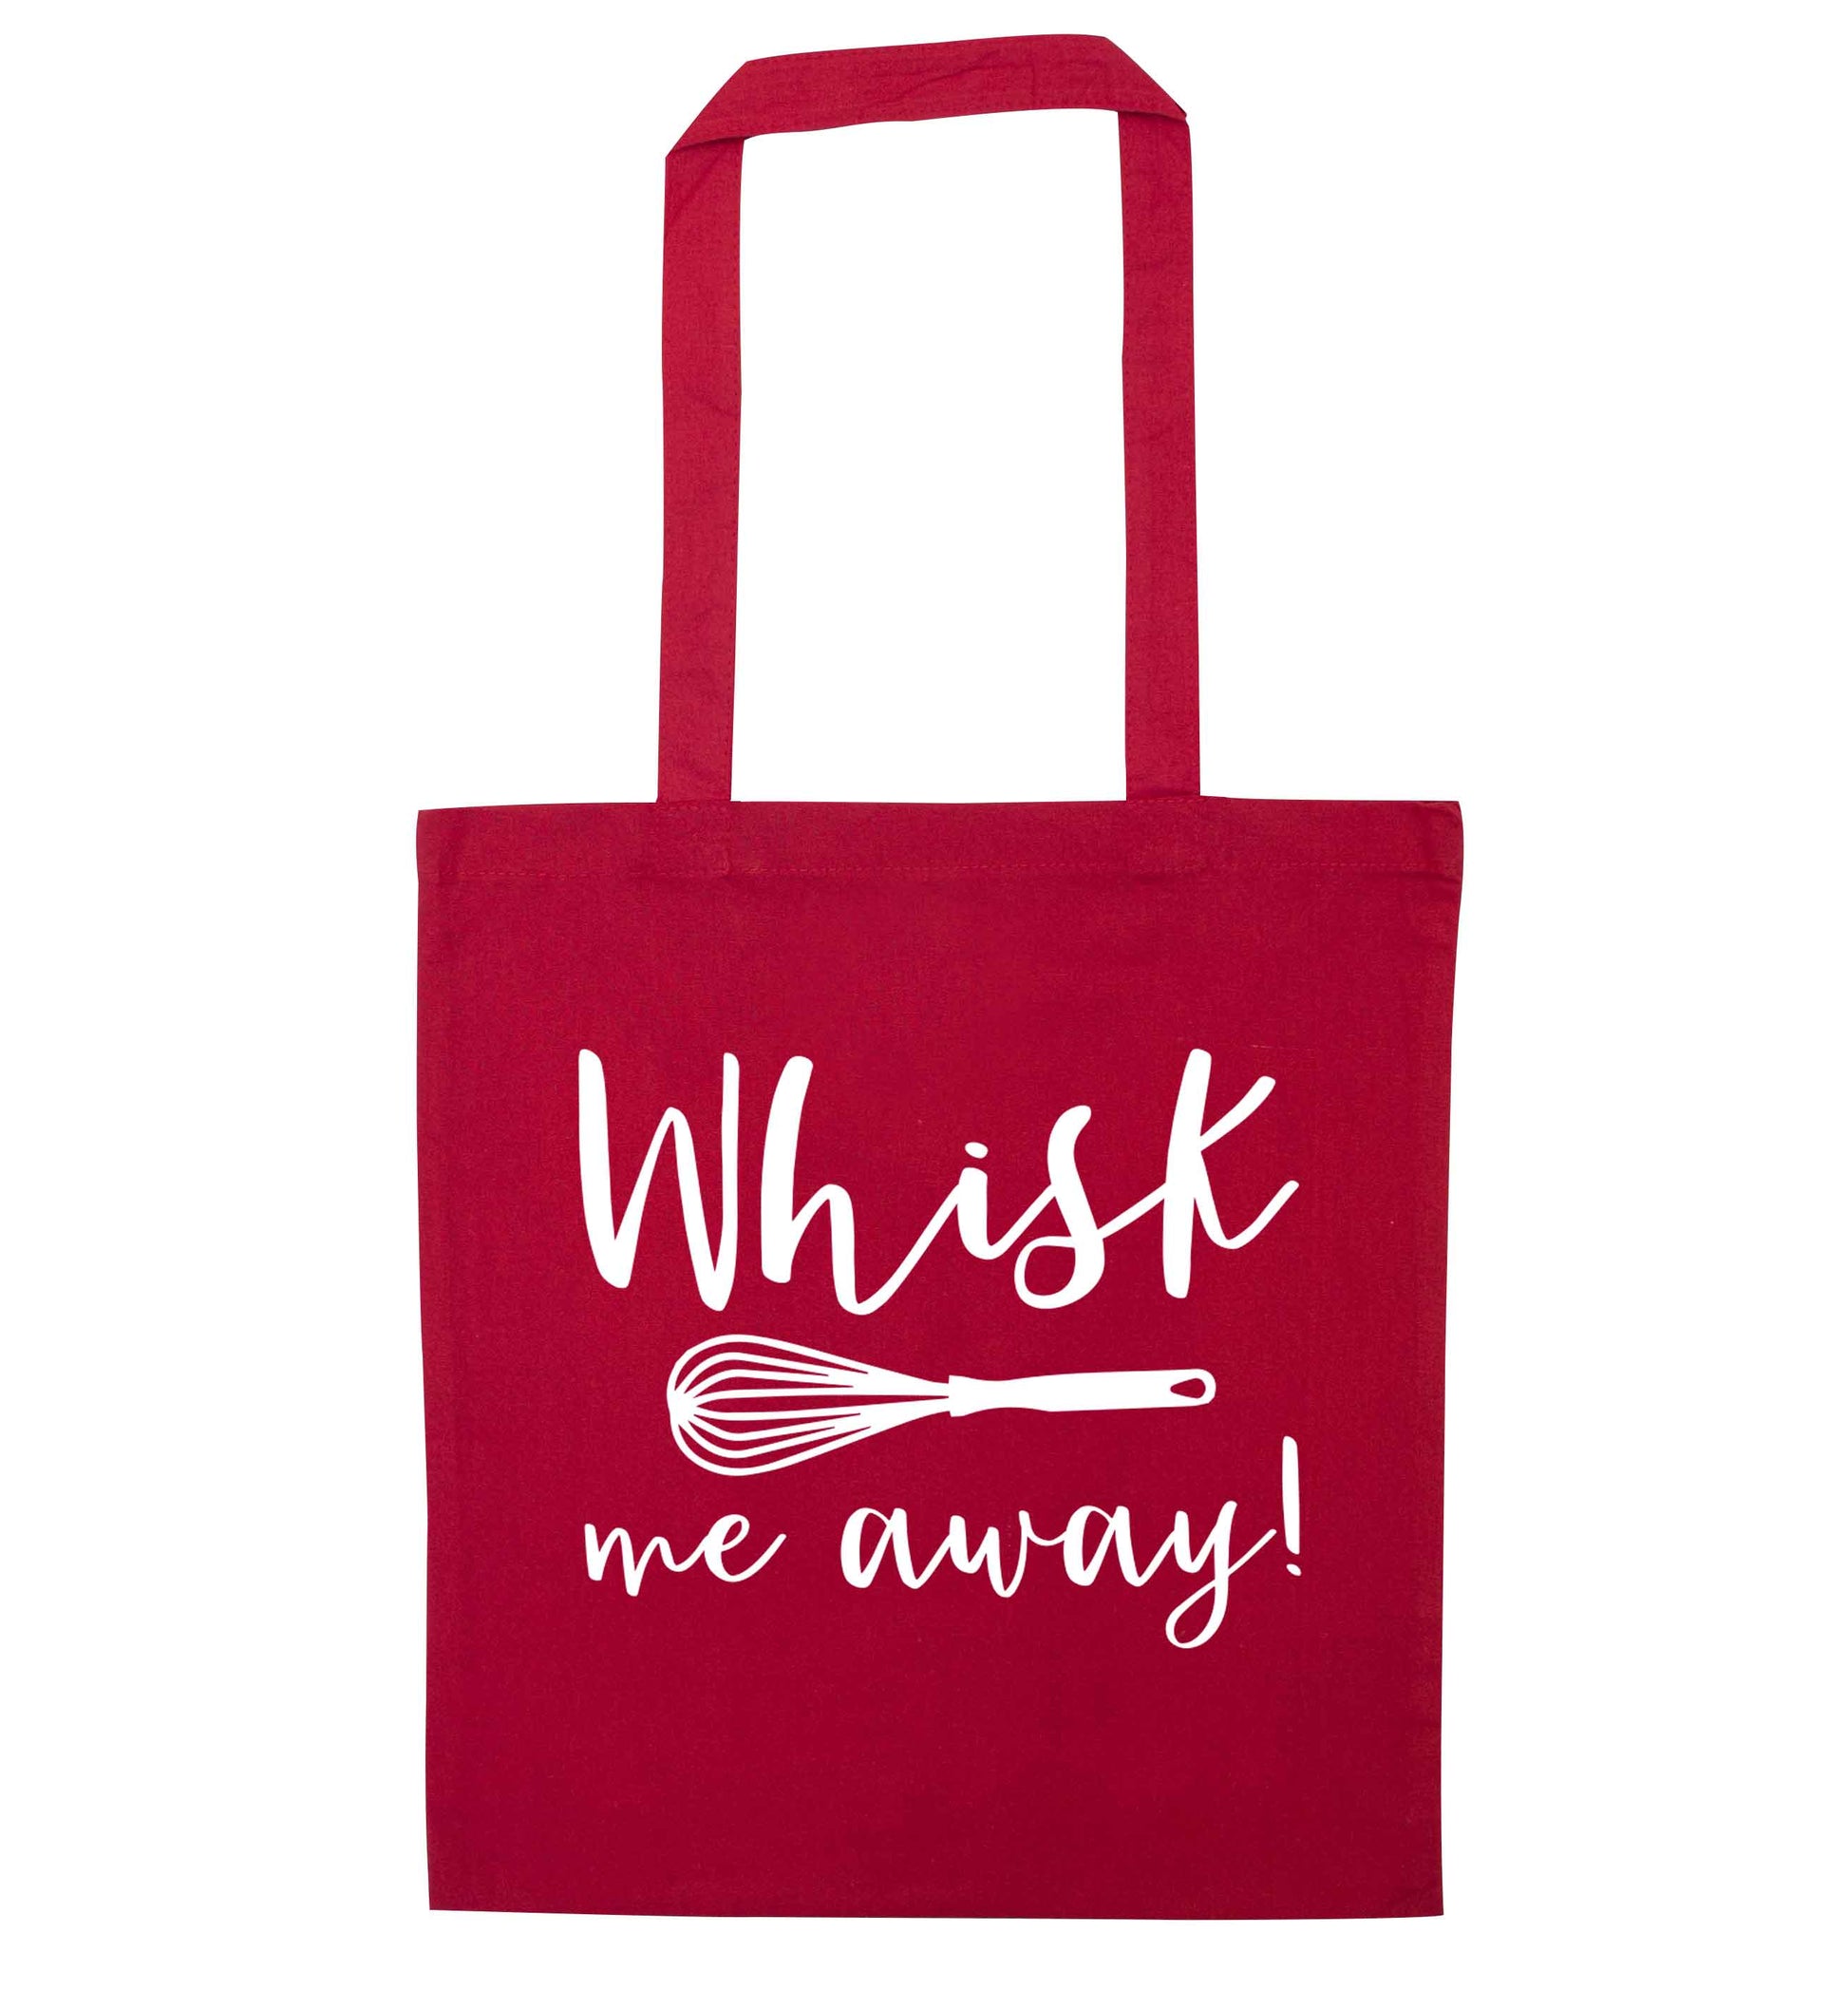 Whisk me away red tote bag